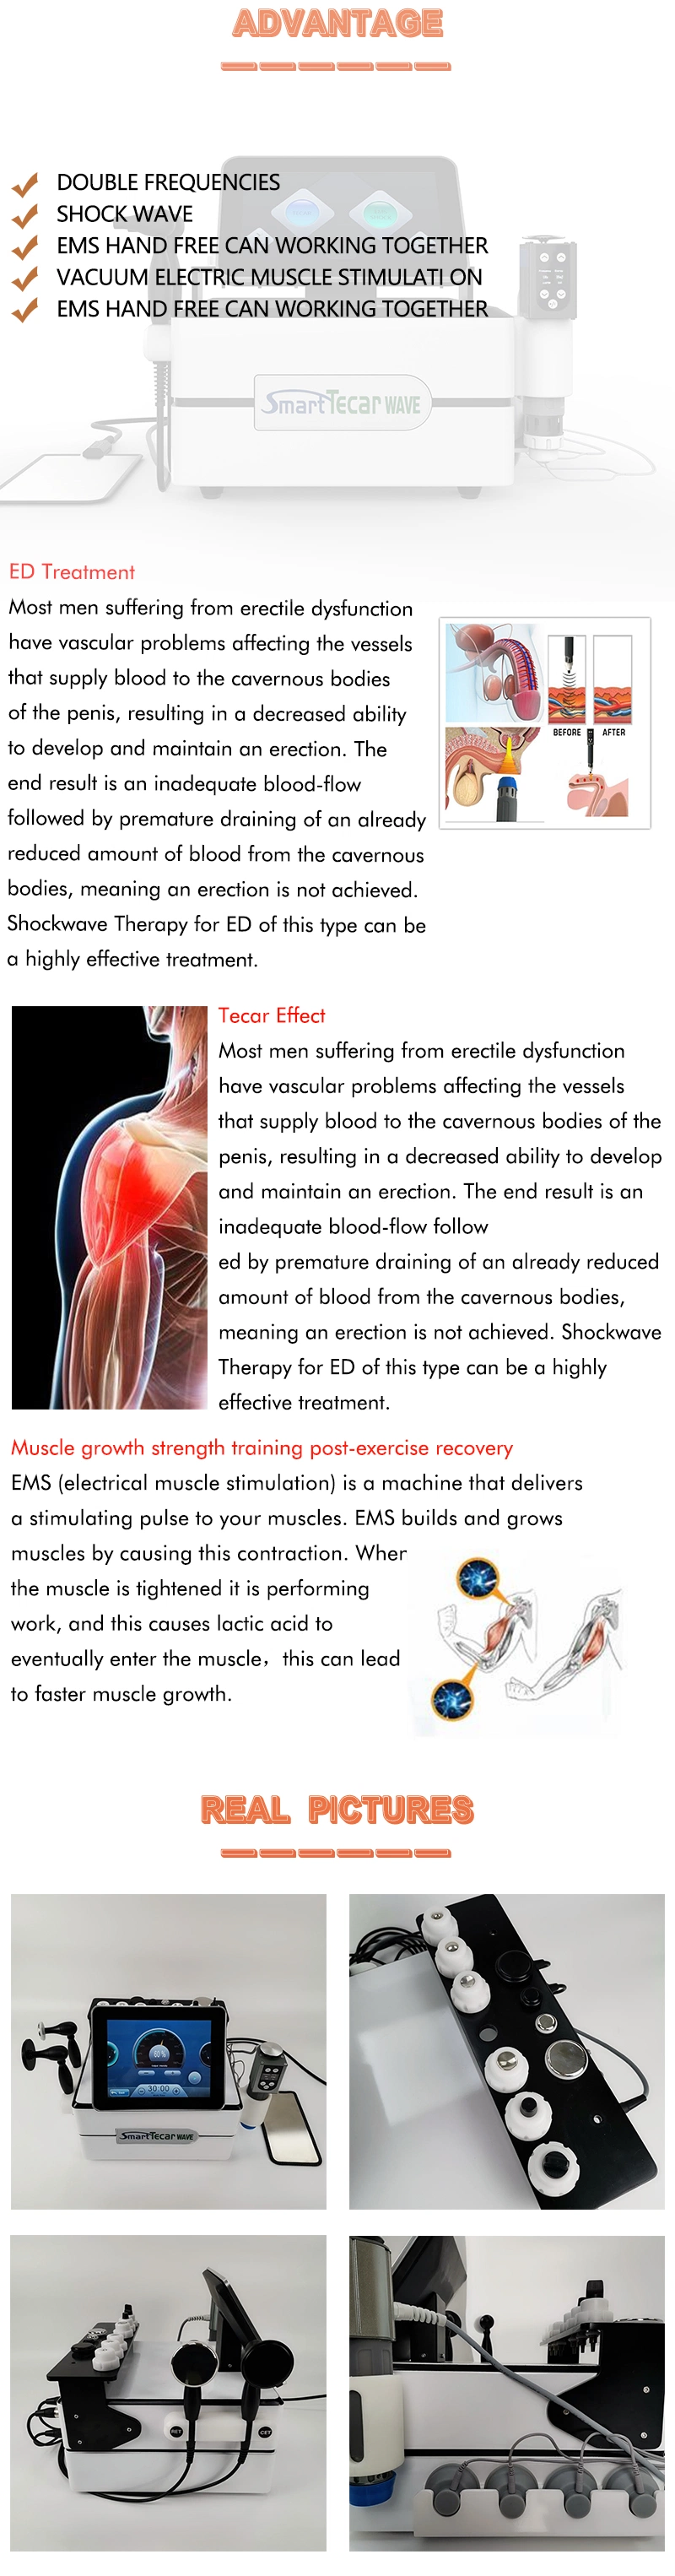 Tecar Smart Wave 3 in 1 Physiotherapy Electromagnetic EMS Shockwave Machine for Sale